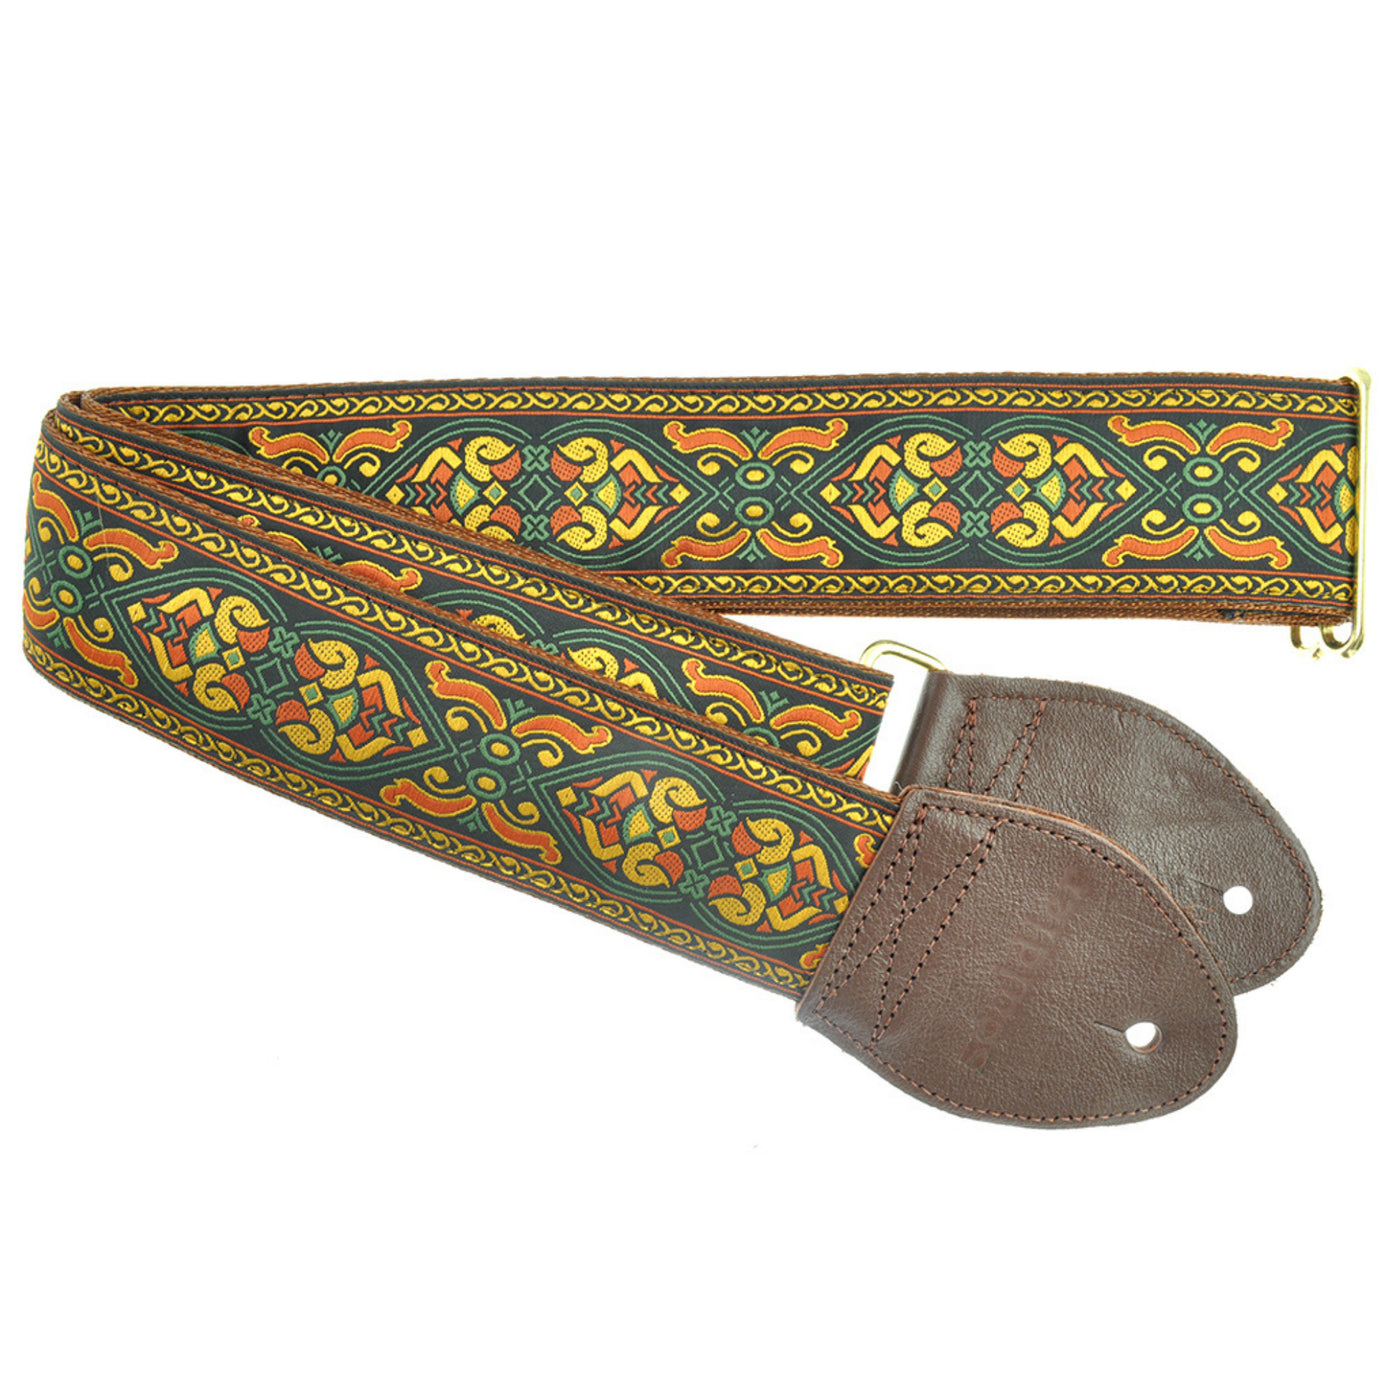 Souldier GS0251NM05WB - Handmade Seatbelt Guitar Strap for Bass, Electric or Acoustic Guitar, 2 Inches Wide and Adjustable Length from 30" to 63"  Made in the USA, Braveheart